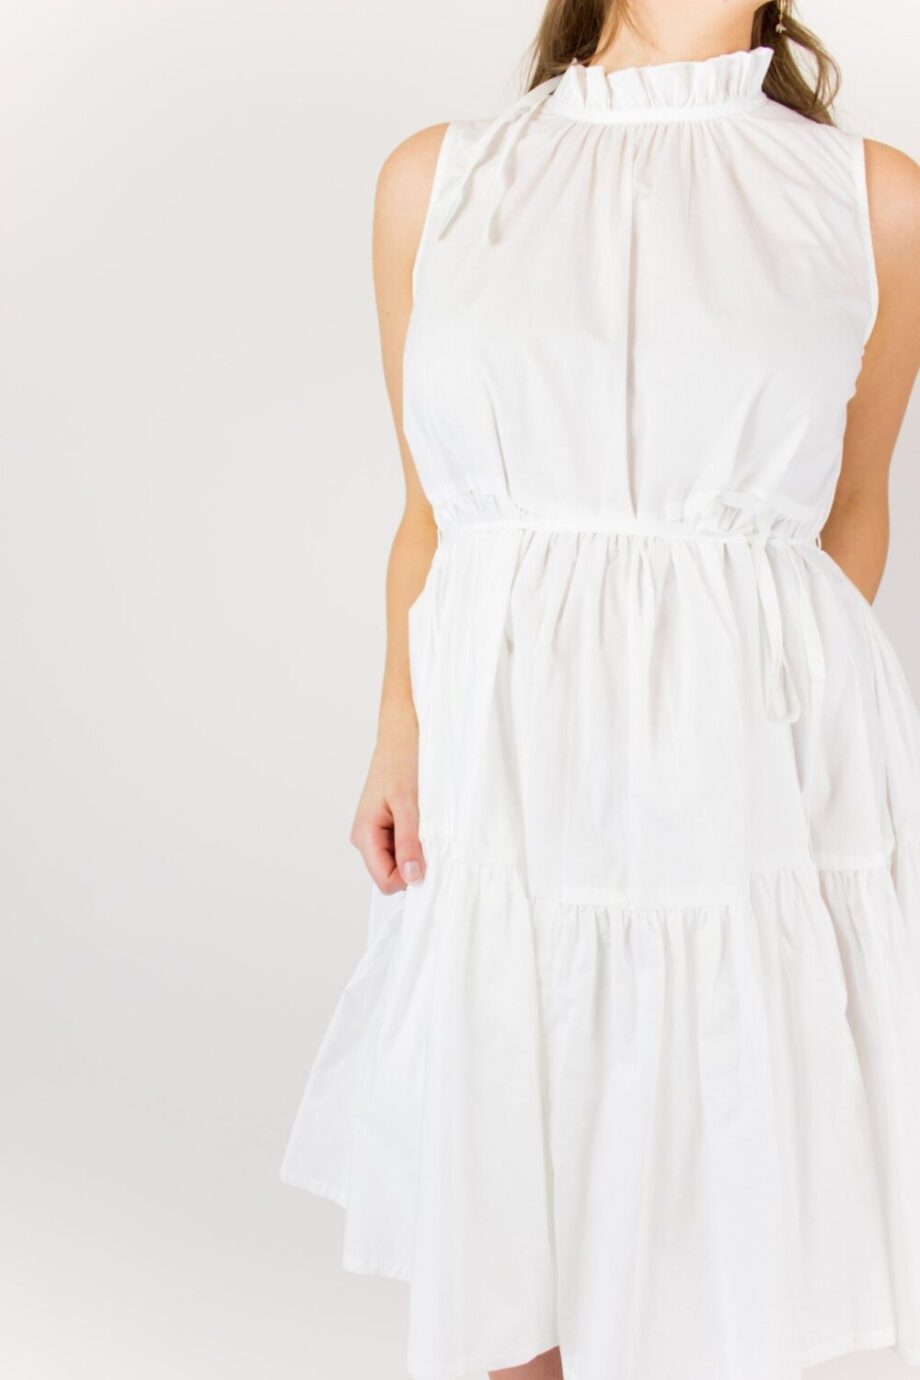 closeup French Connection white short dress